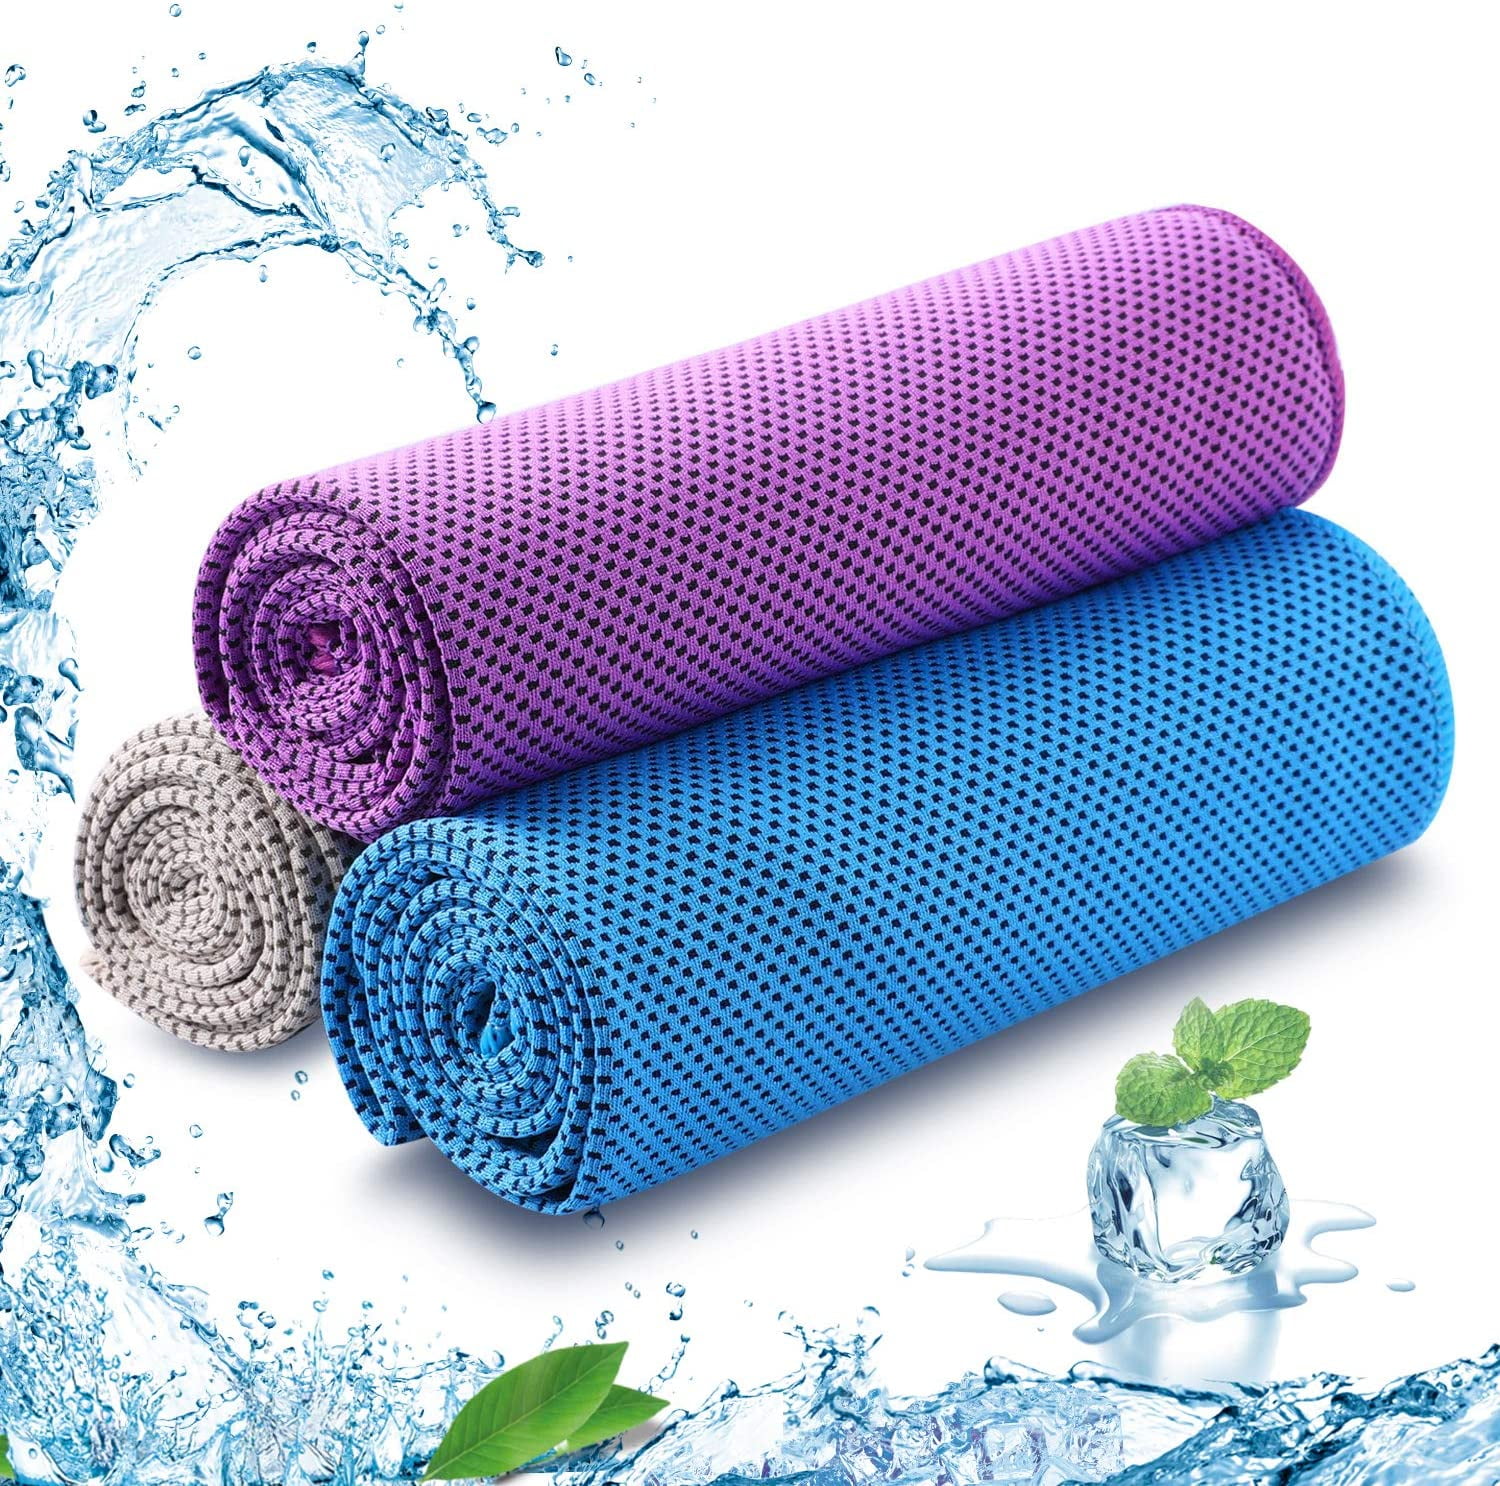 Instant Cooling Towel Sports Gym Soft Towel Drying Sweat Pets Baby Absorb Dry UK 